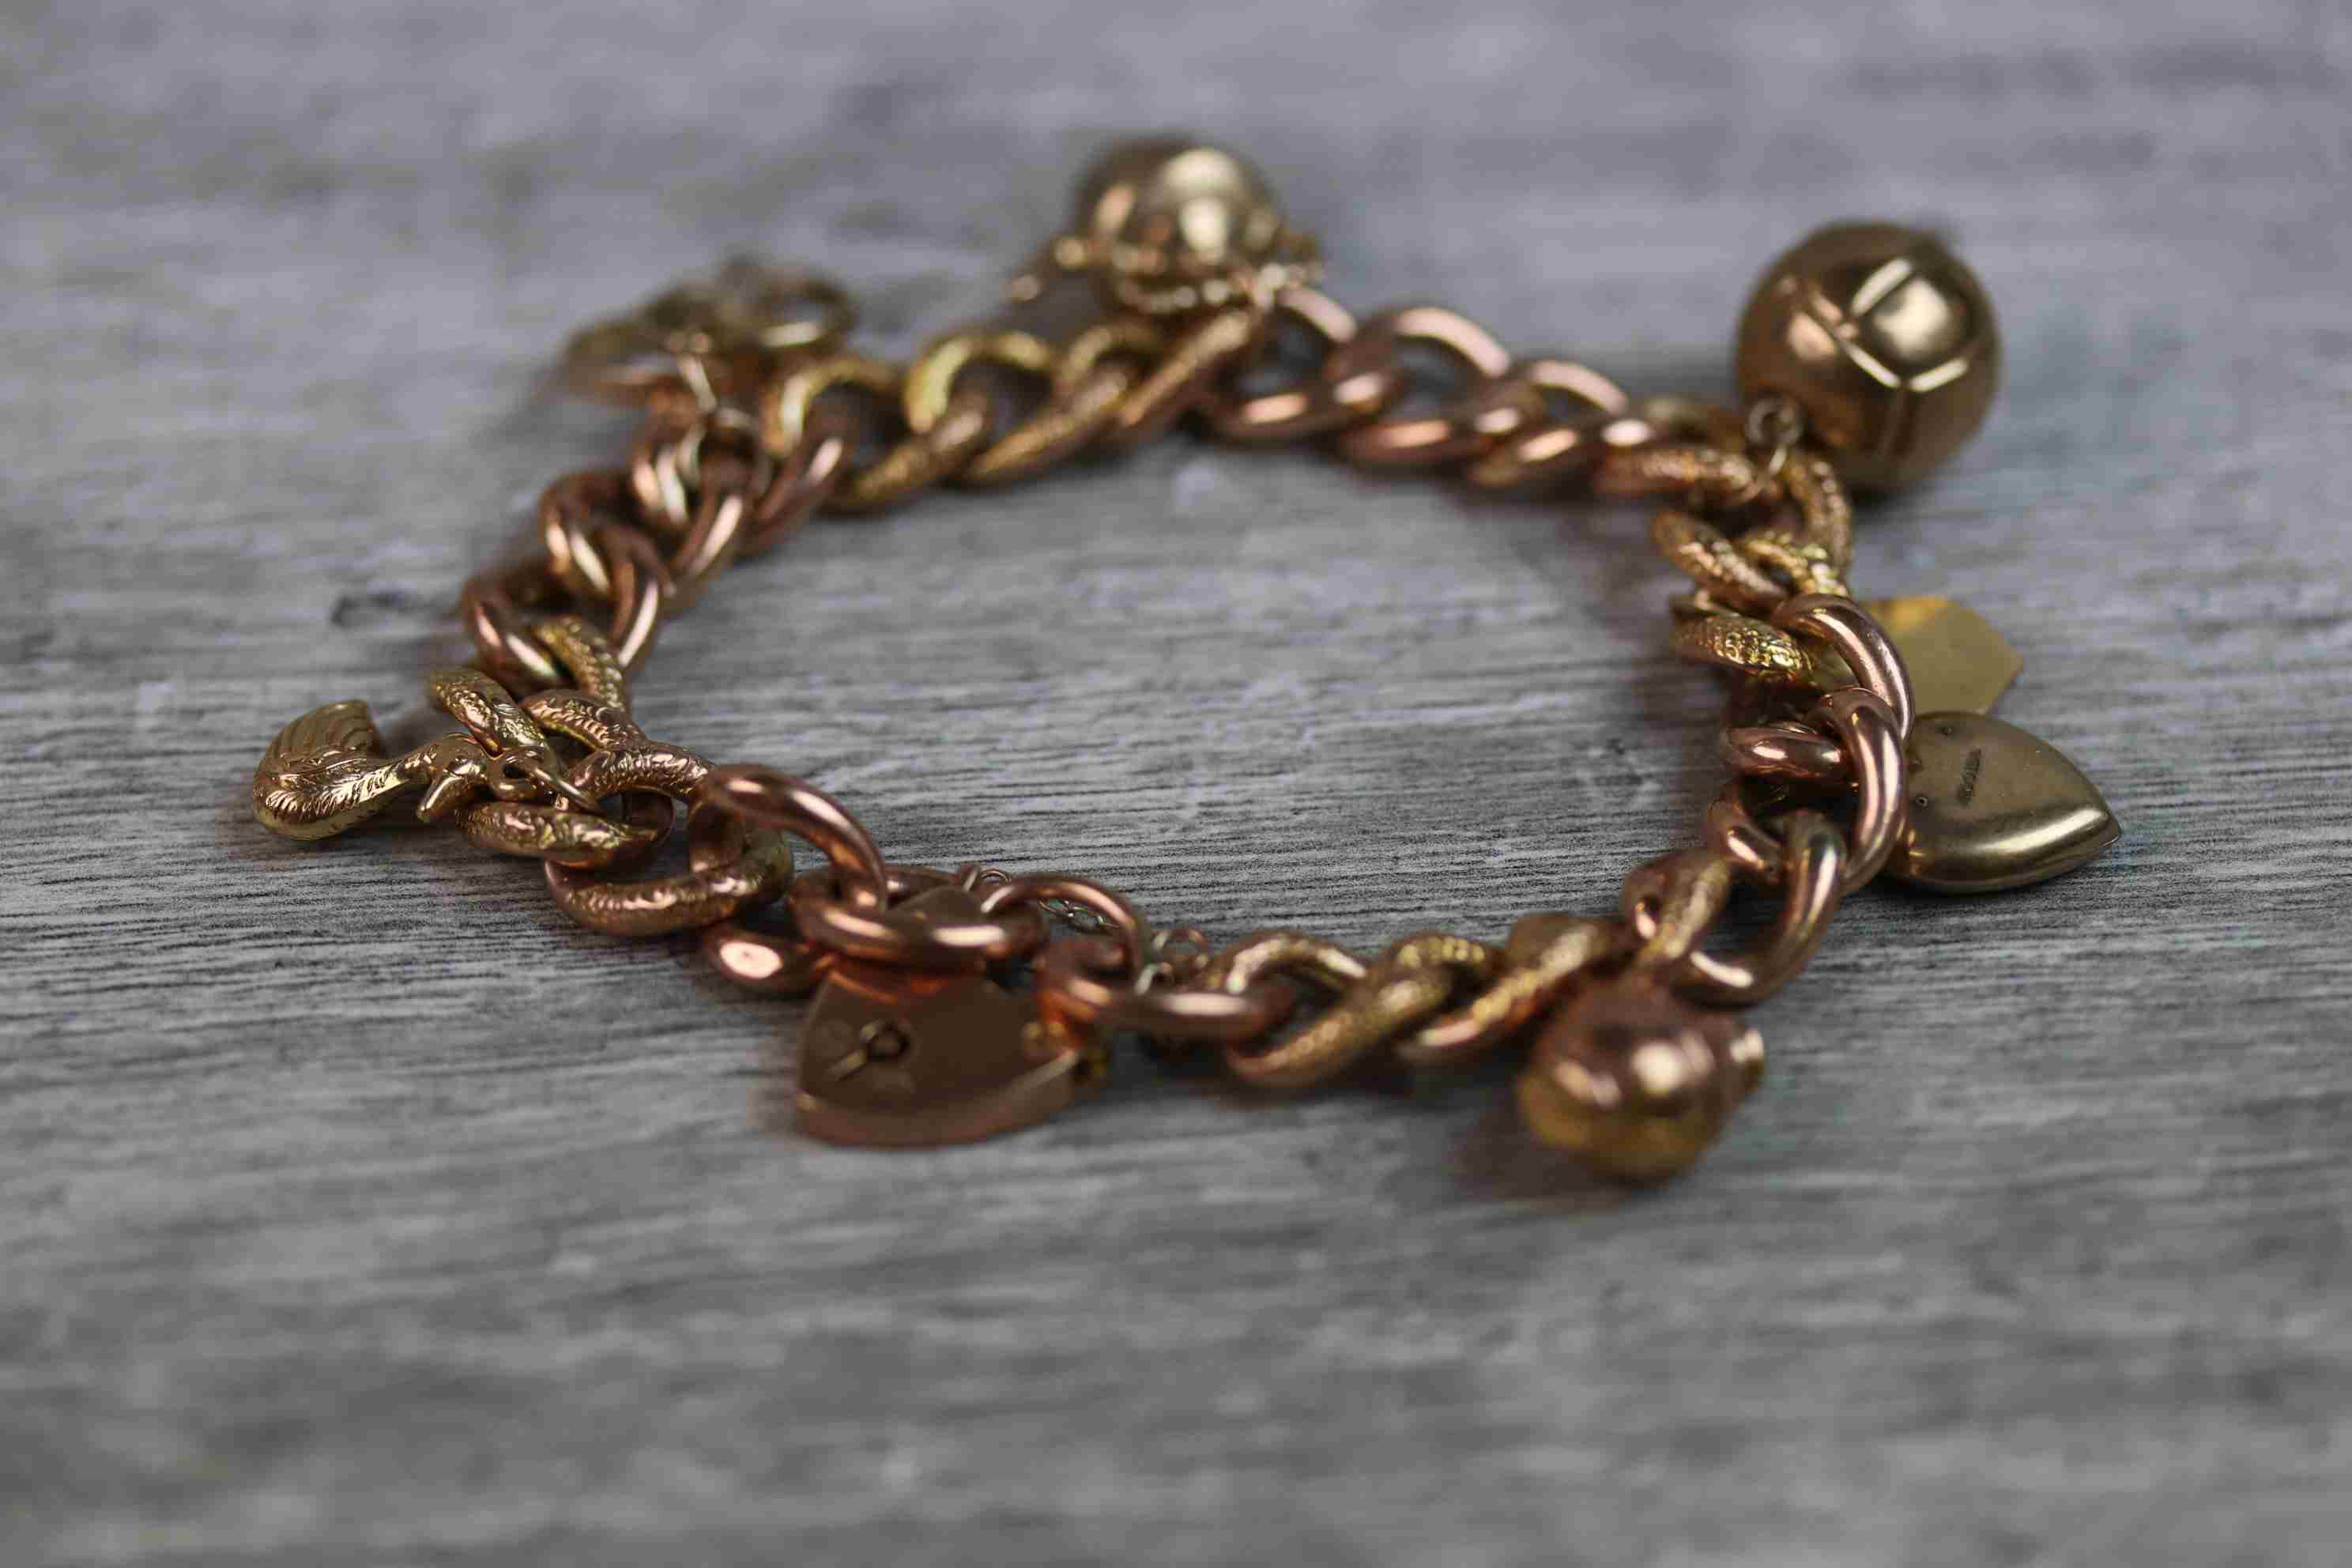 9ct rose gold curb link charm bracelet with 9ct rose gold padlock clasp, seven 9ct gold and yellow - Image 10 of 10